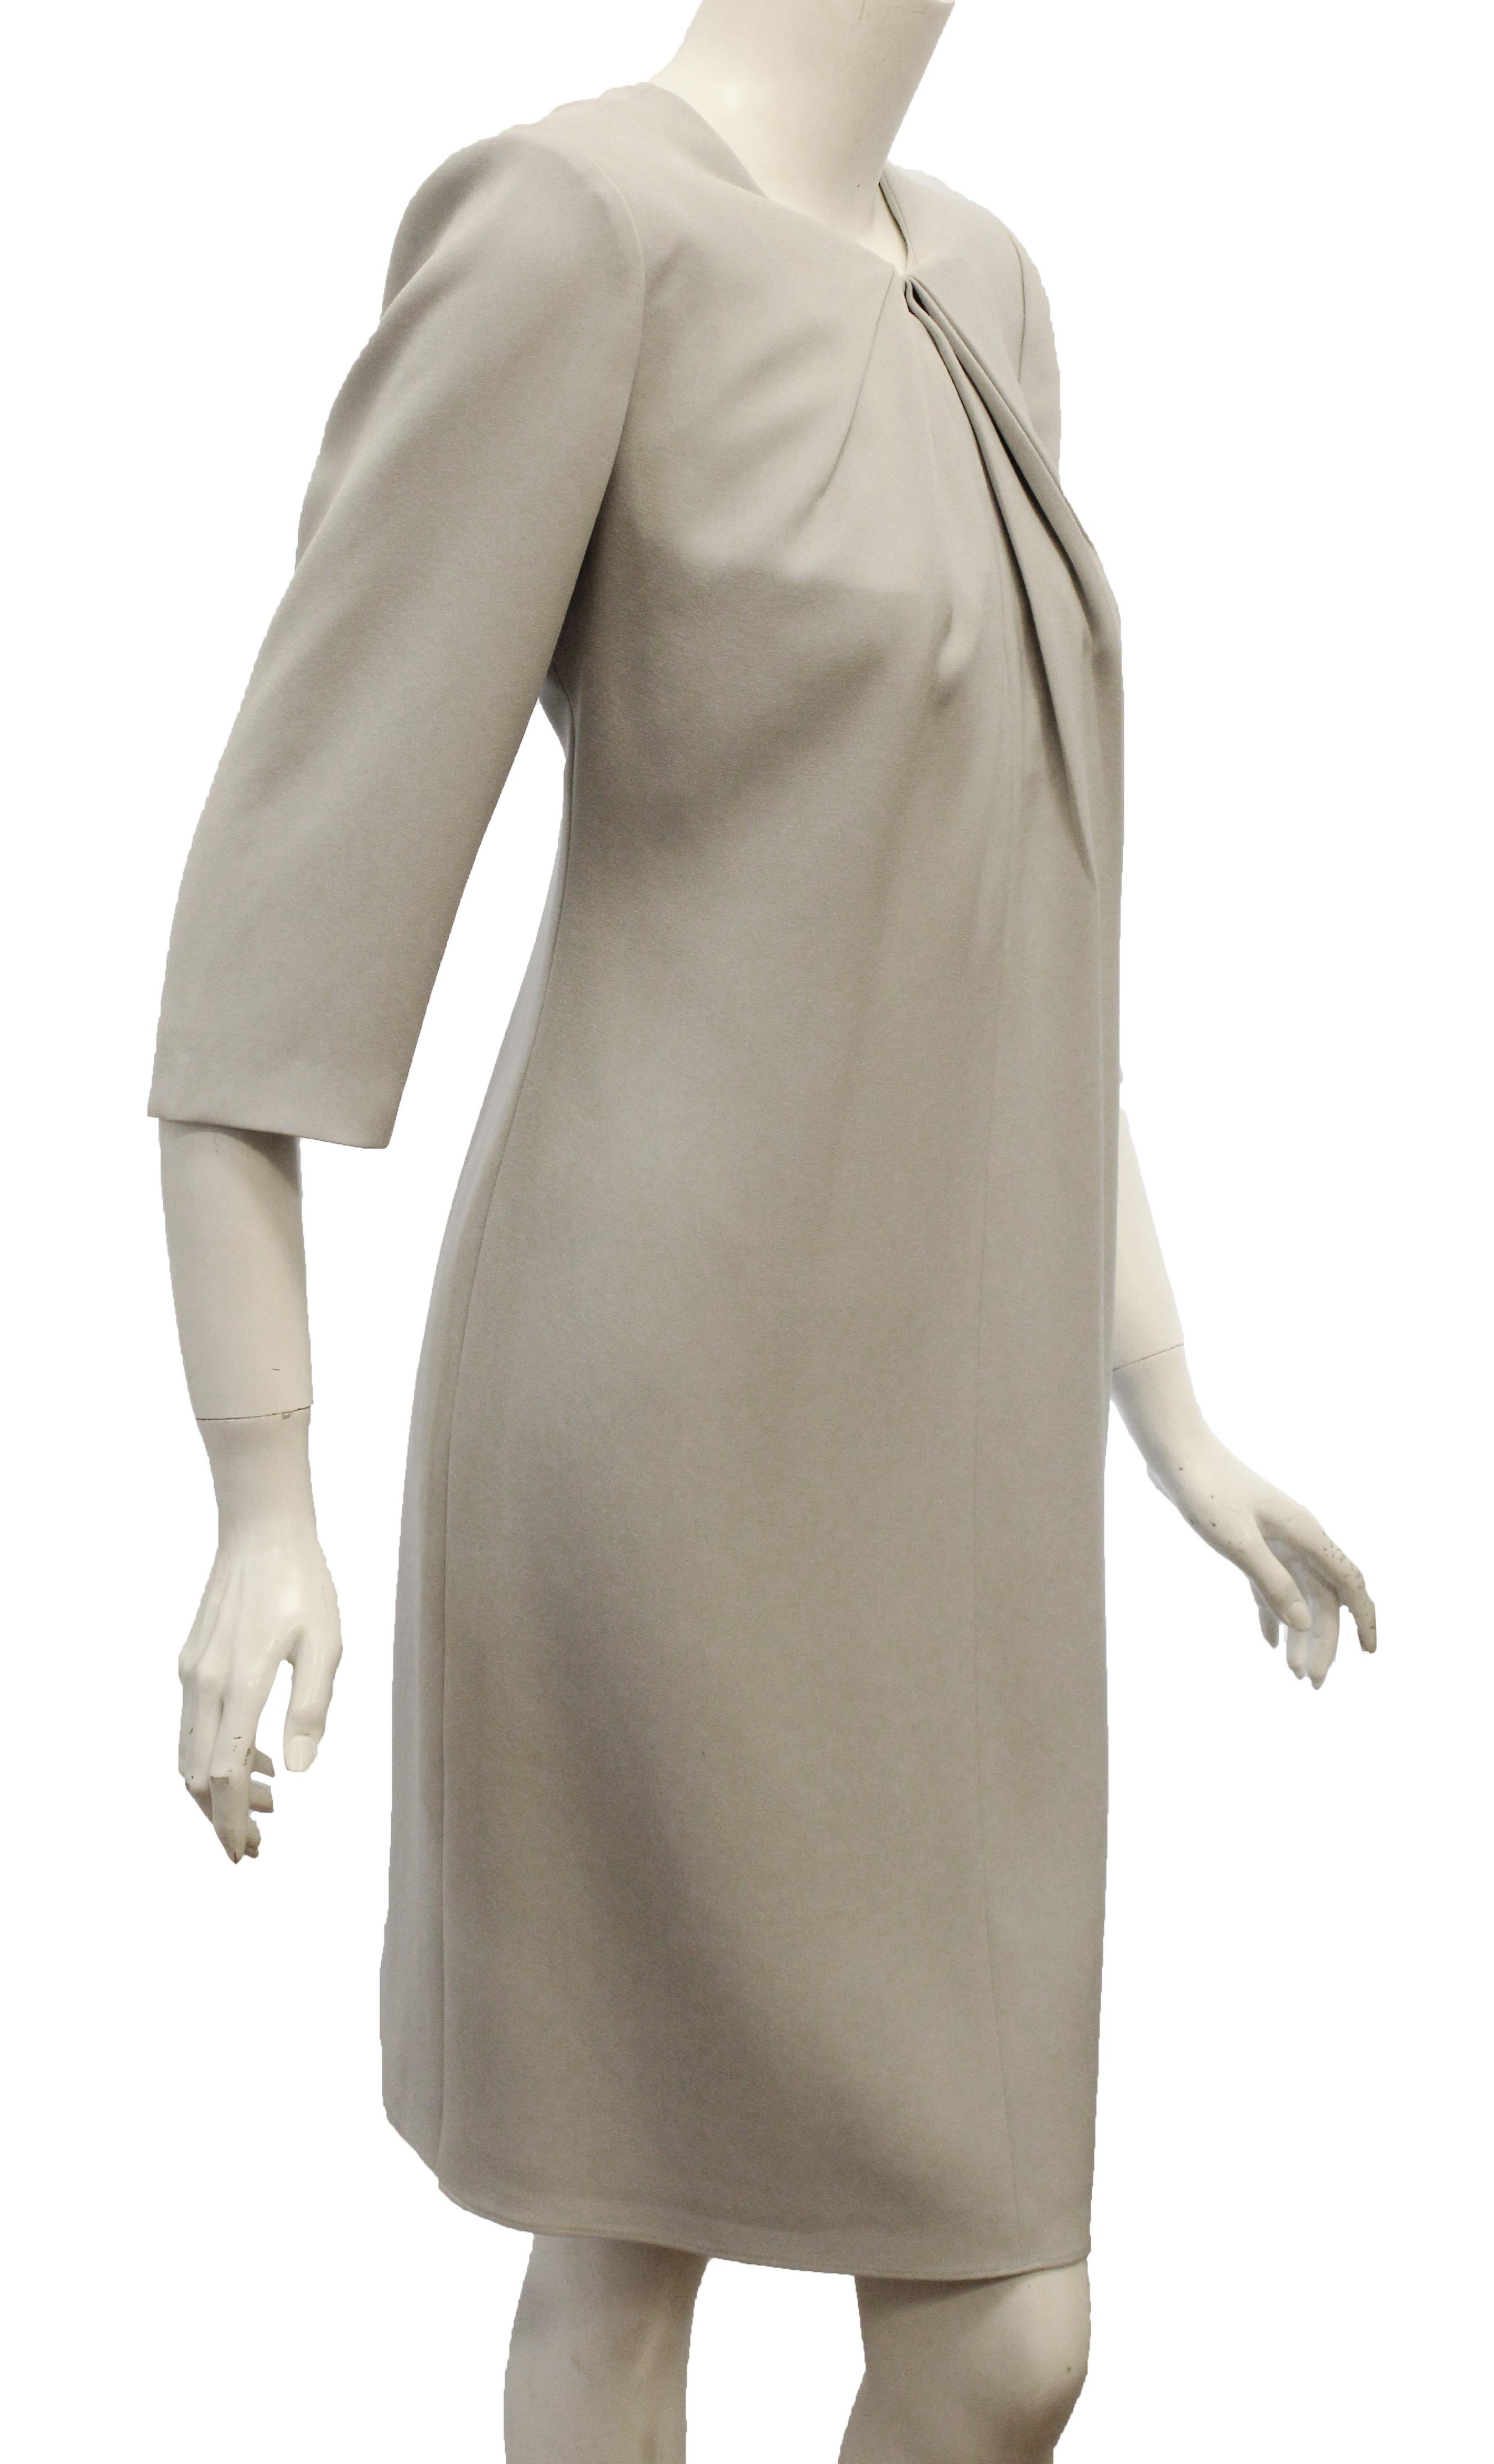 Armani Collezioni grey jersey with ruched collar dress includes a slit keyhole at front.  This  3/4 sleeve sheath knee length dress is perfect for all seasons by just adding a jacket, a scarf or a coat.   This dress is fully lined and in excellent